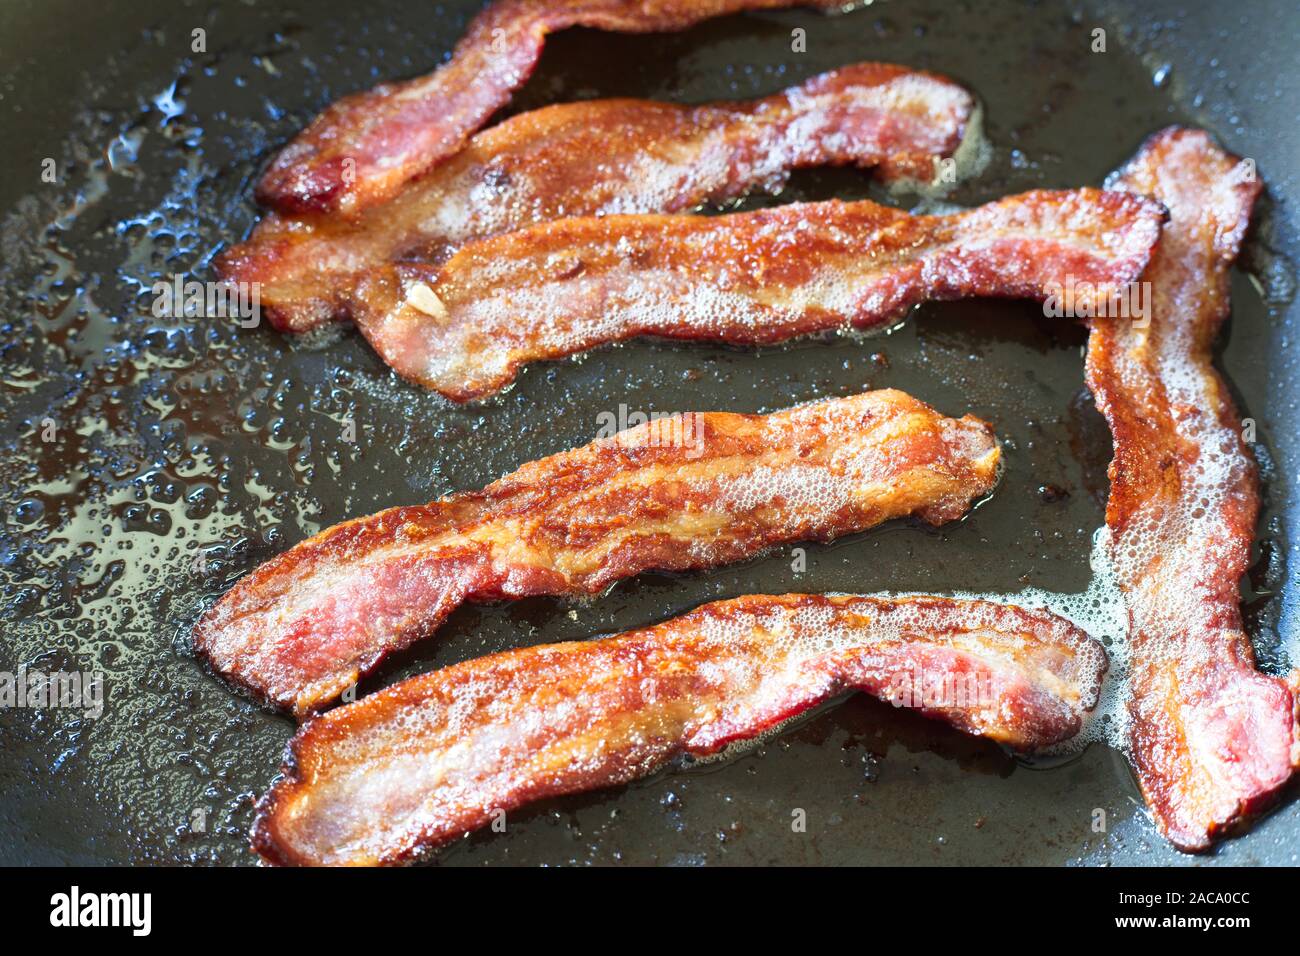 Streaky bacon being fried in a frying pan, UK Stock Photo